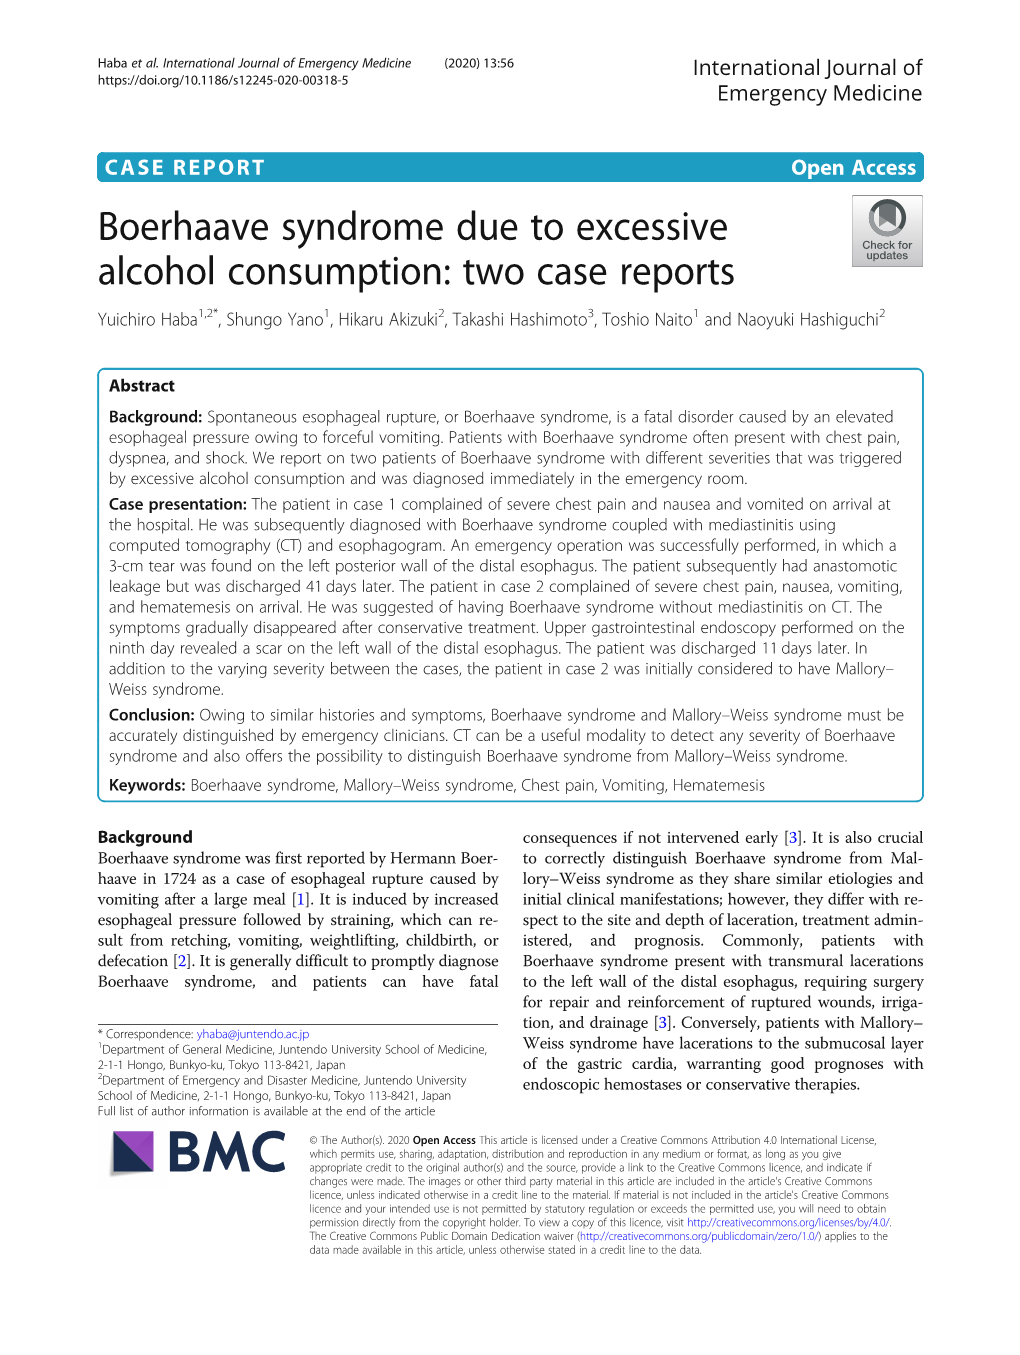 Boerhaave Syndrome Due to Excessive Alcohol Consumption